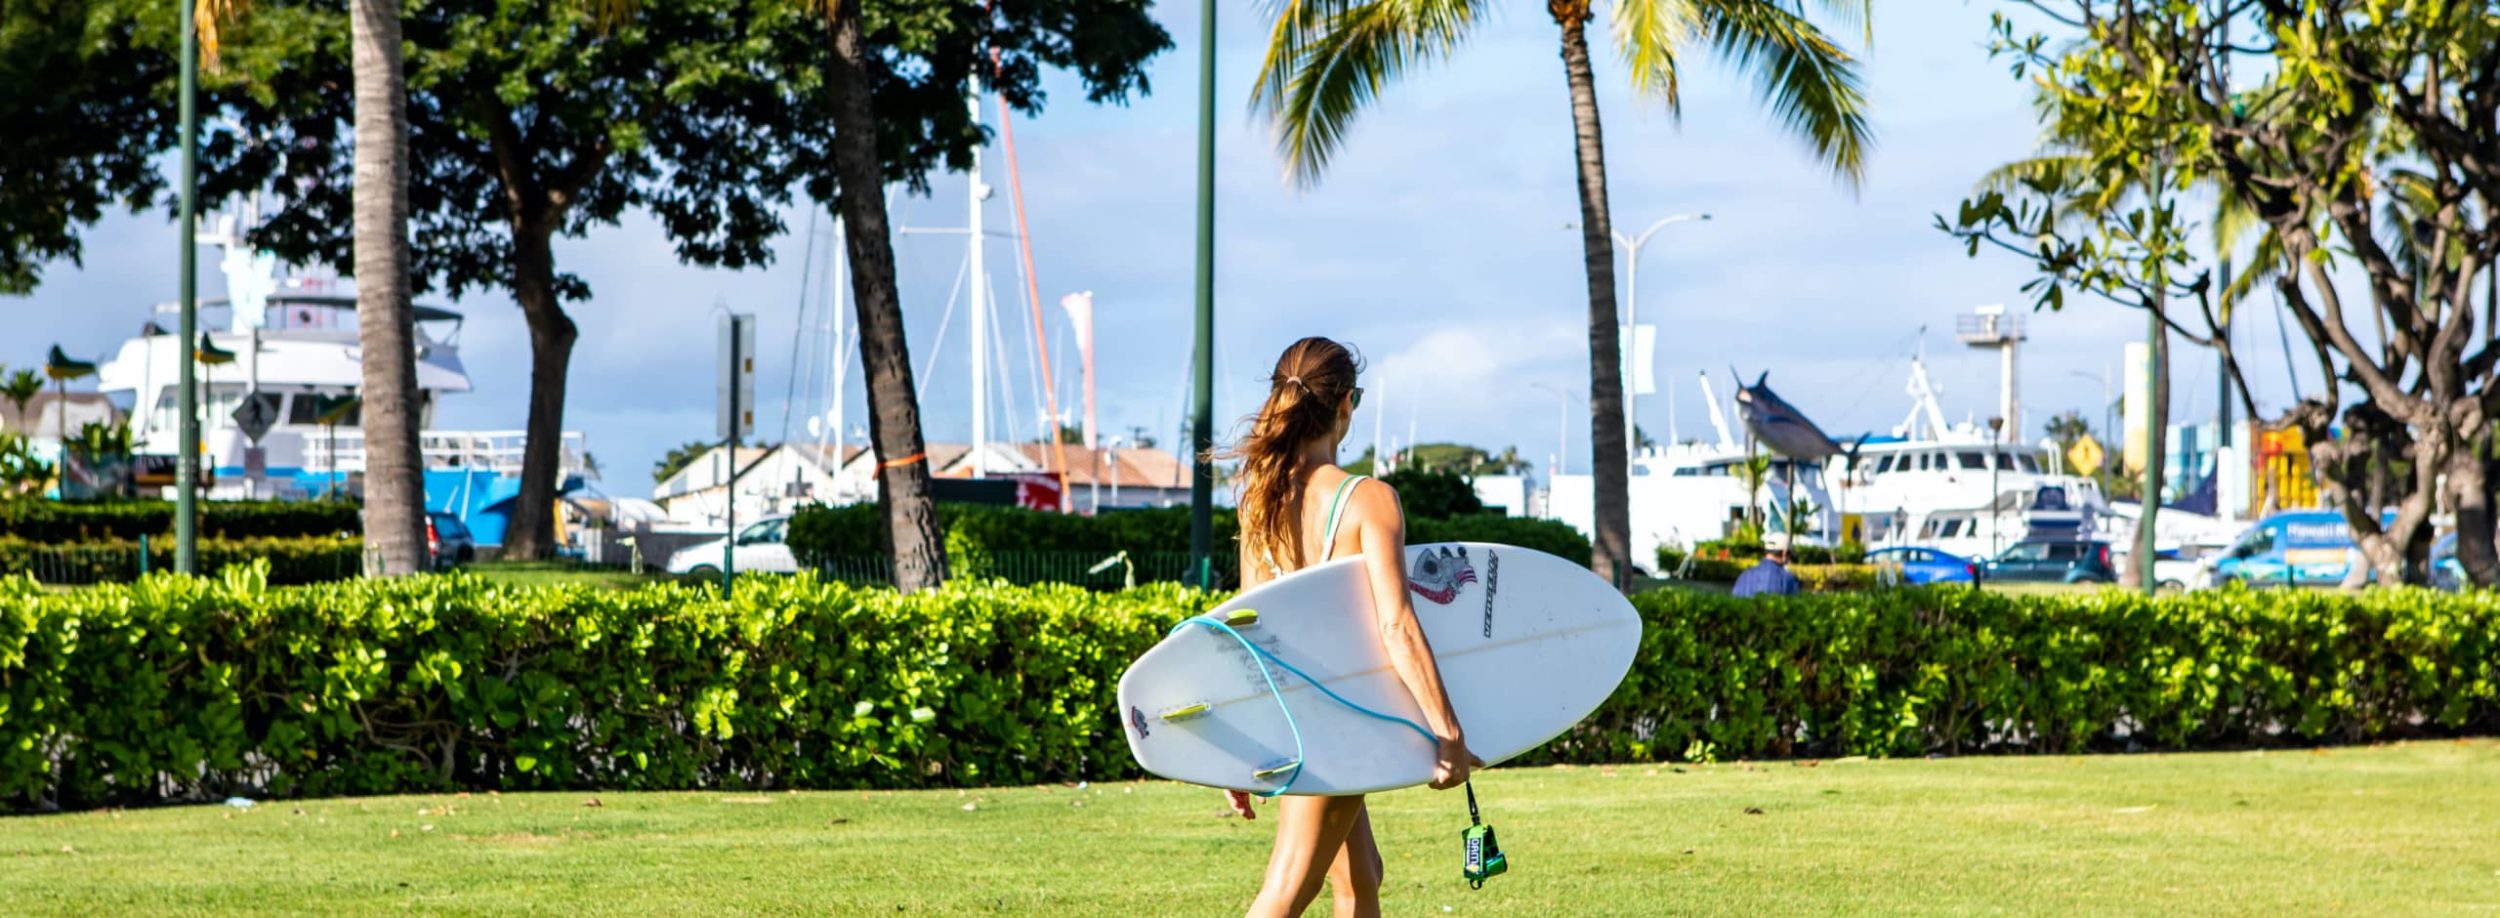 Woman holding surfboard walking through the park